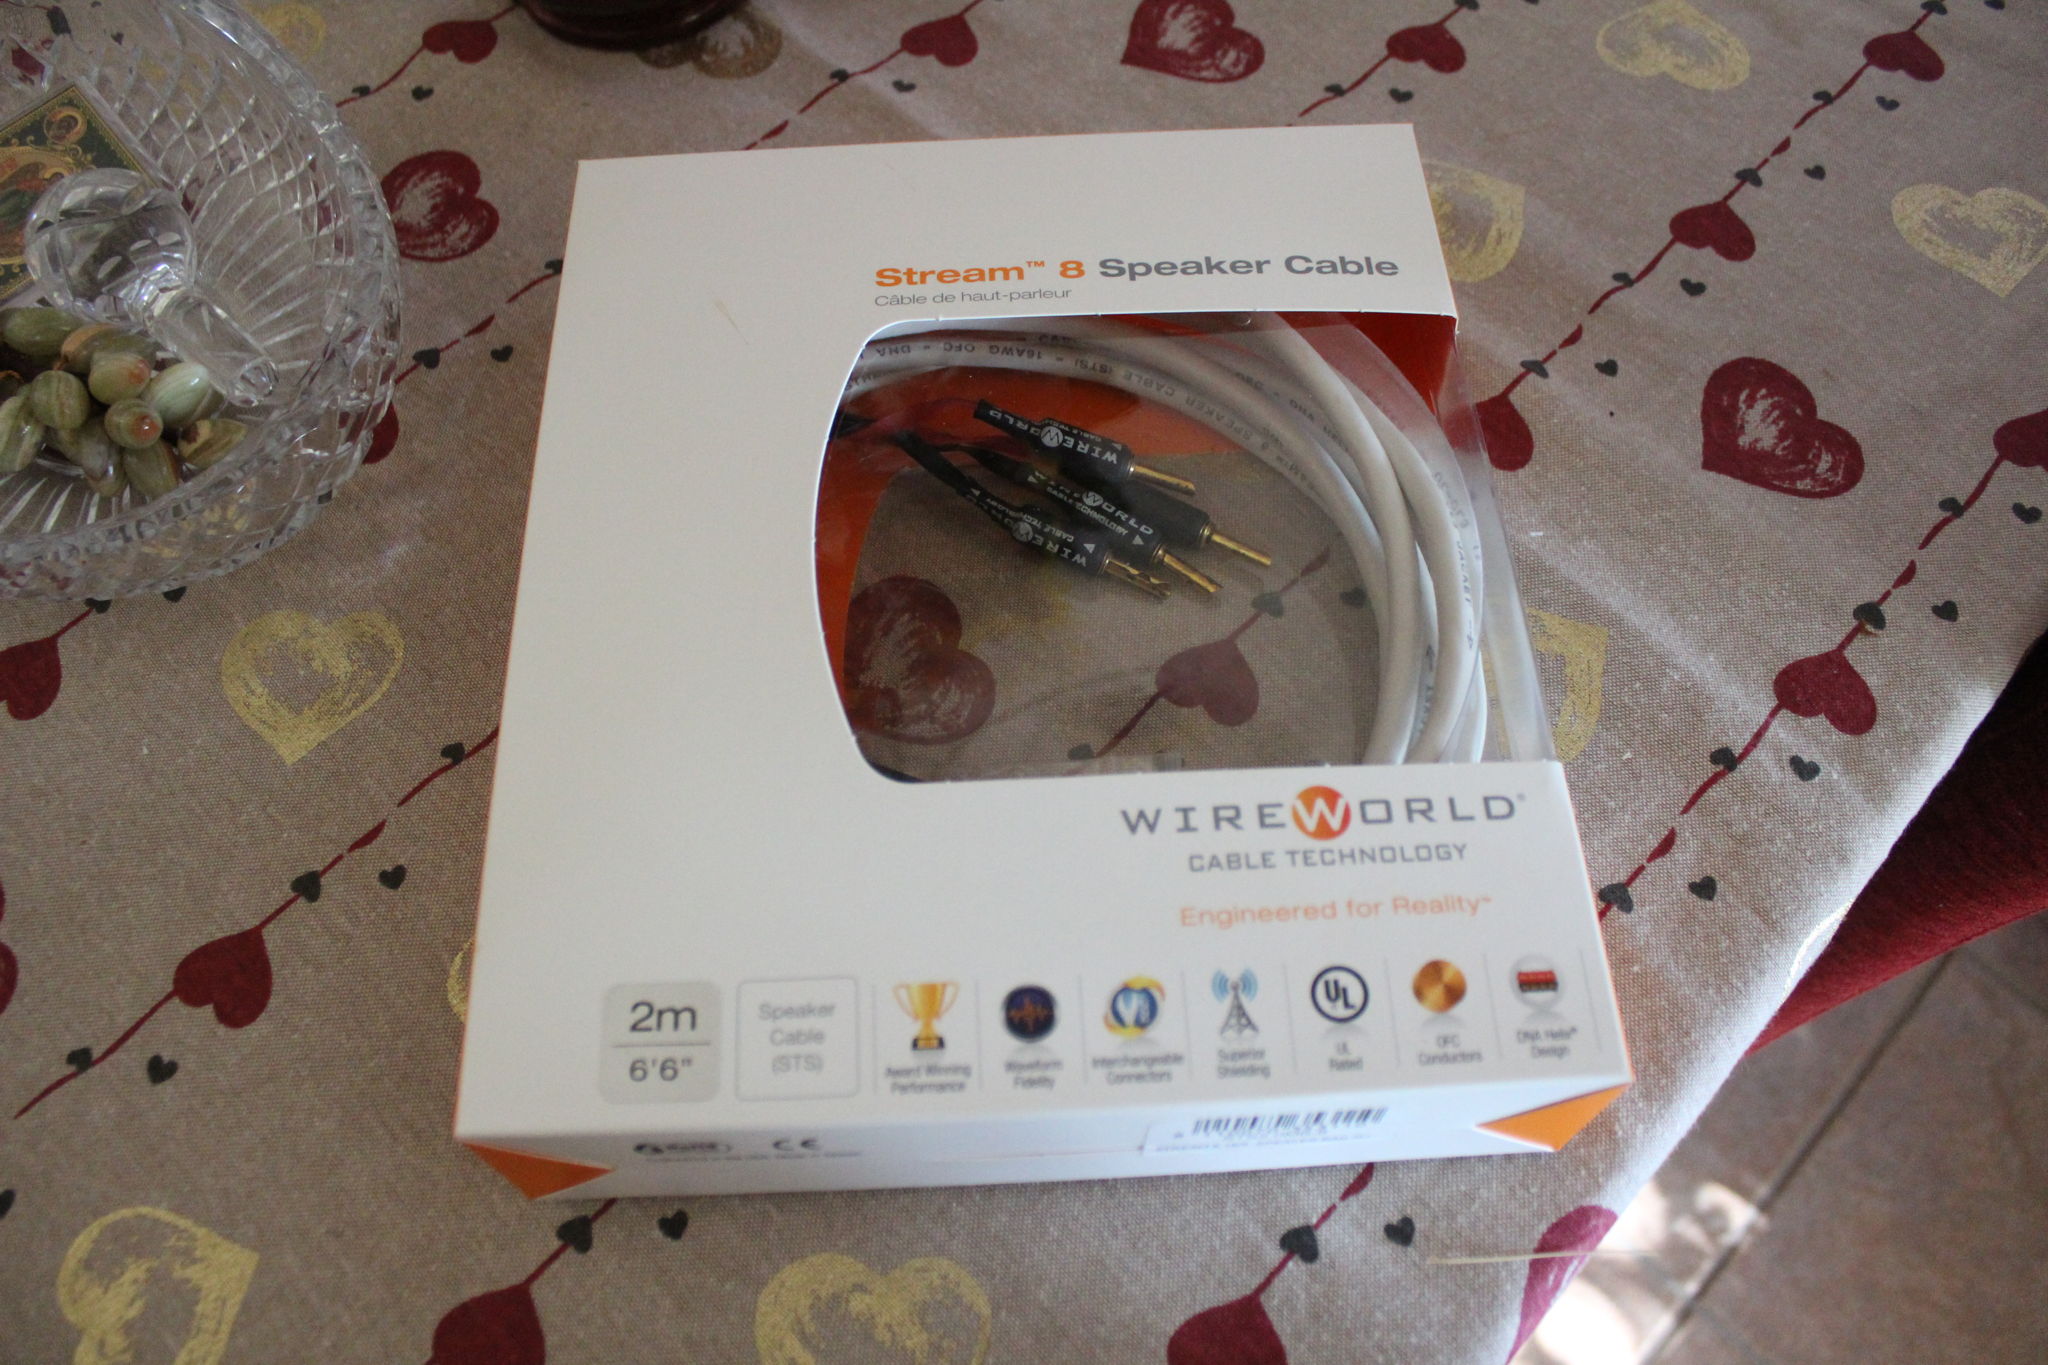 Wireworld Stream 8 Speaker Cables Pair 6.5 ft - AS NEW 4